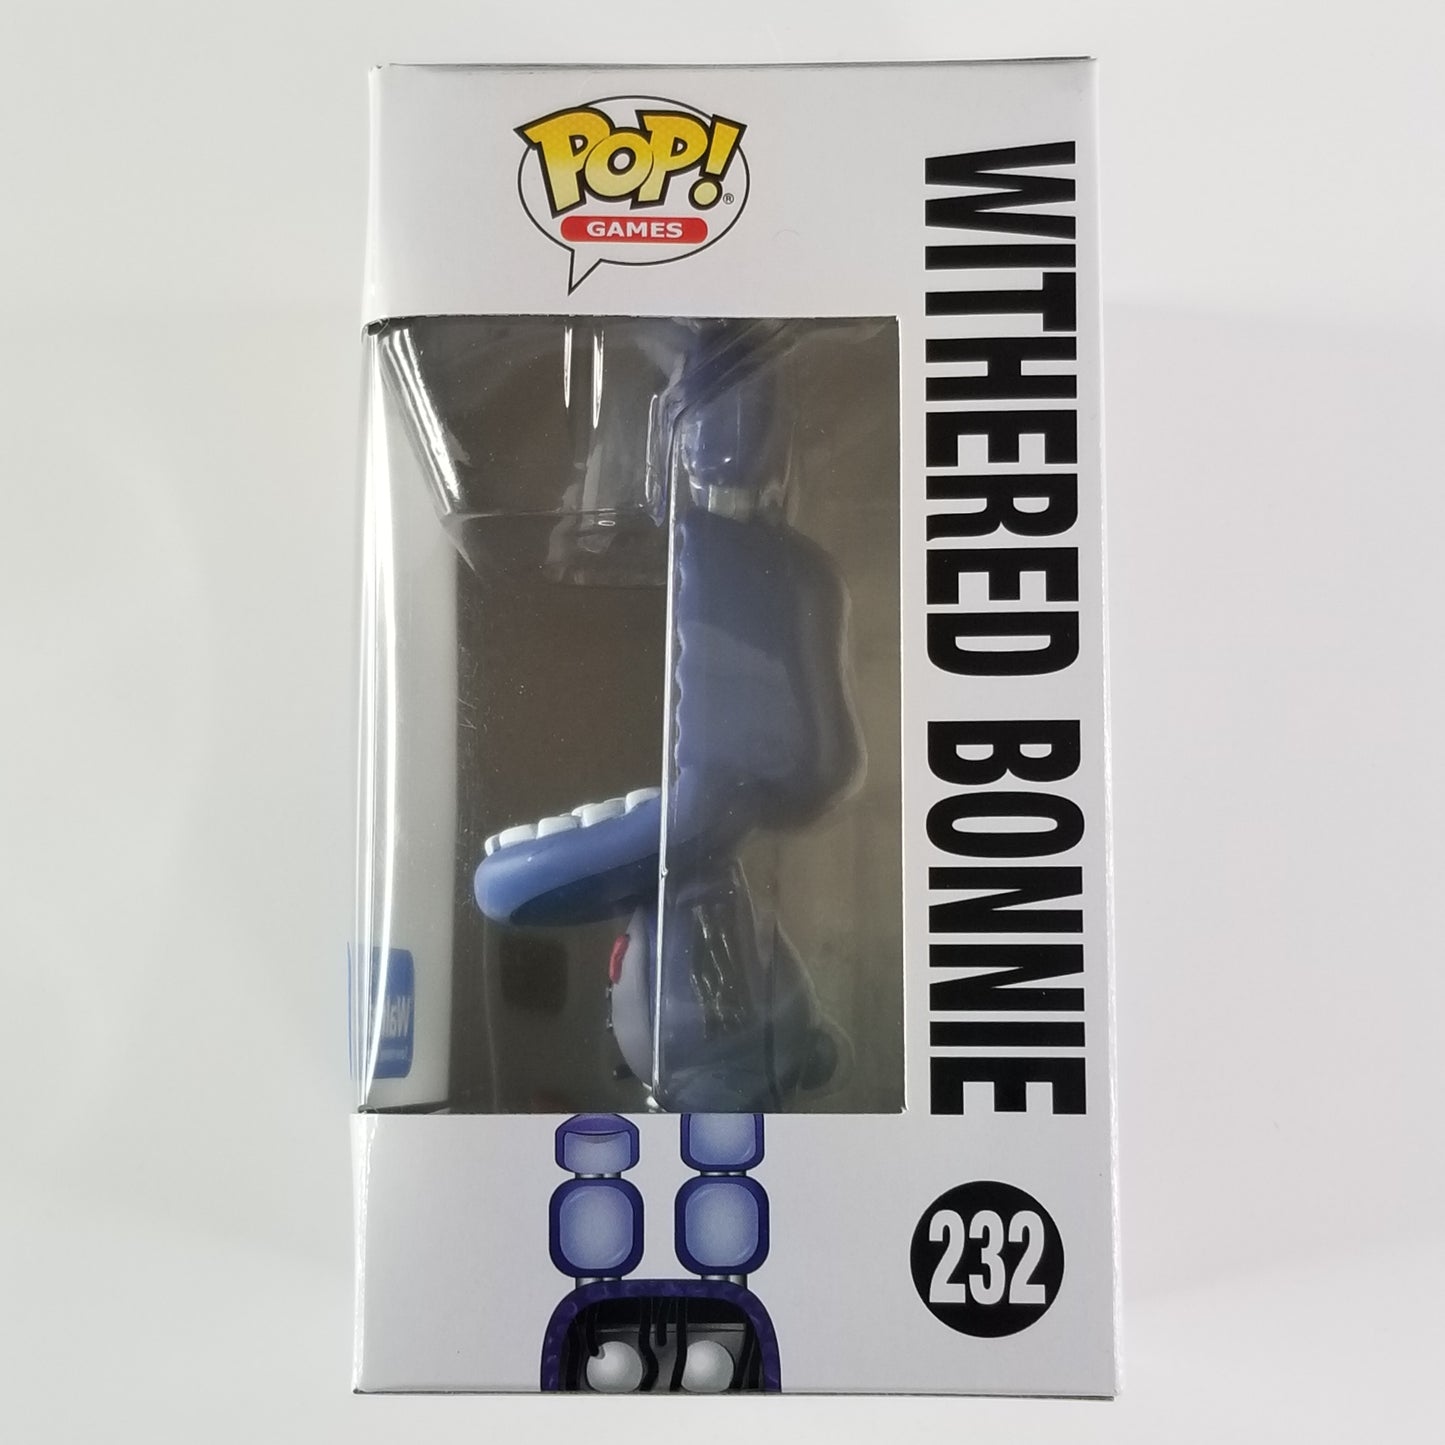 Funko Pop! Games - Withered Bonnie #232 (Five Nights at Freddy's)